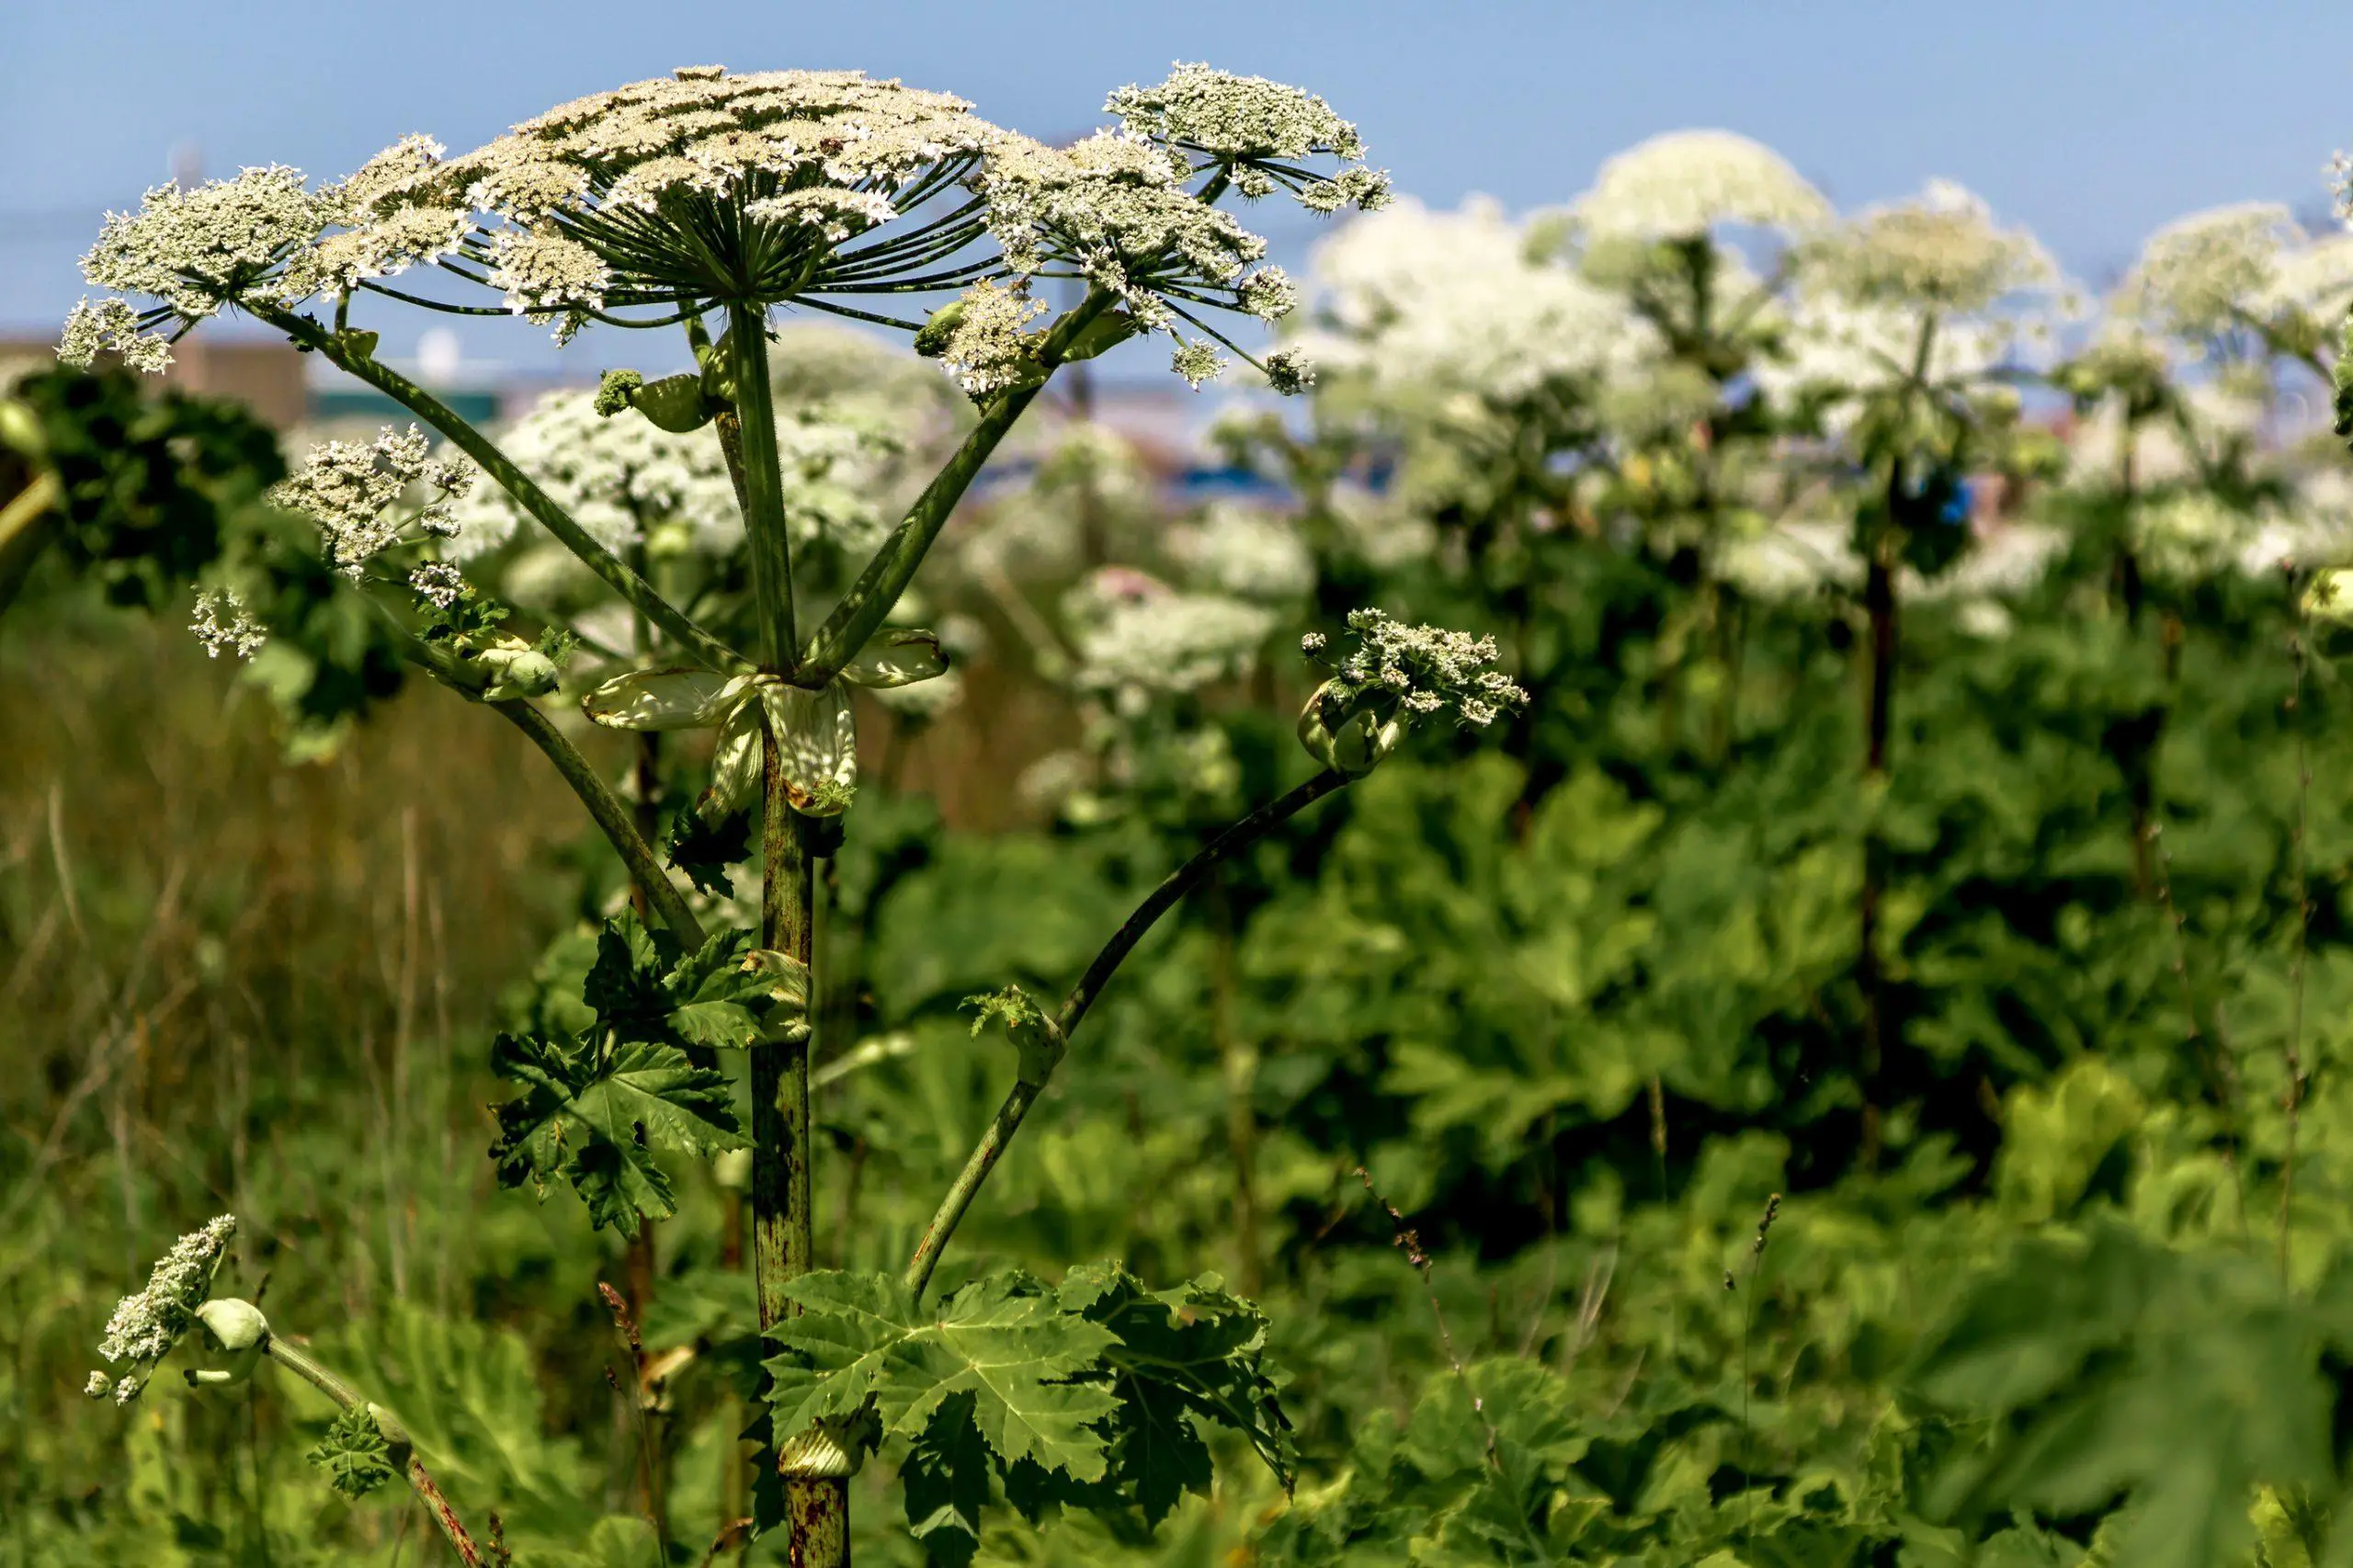 Giant Hogweed growing wild in a field